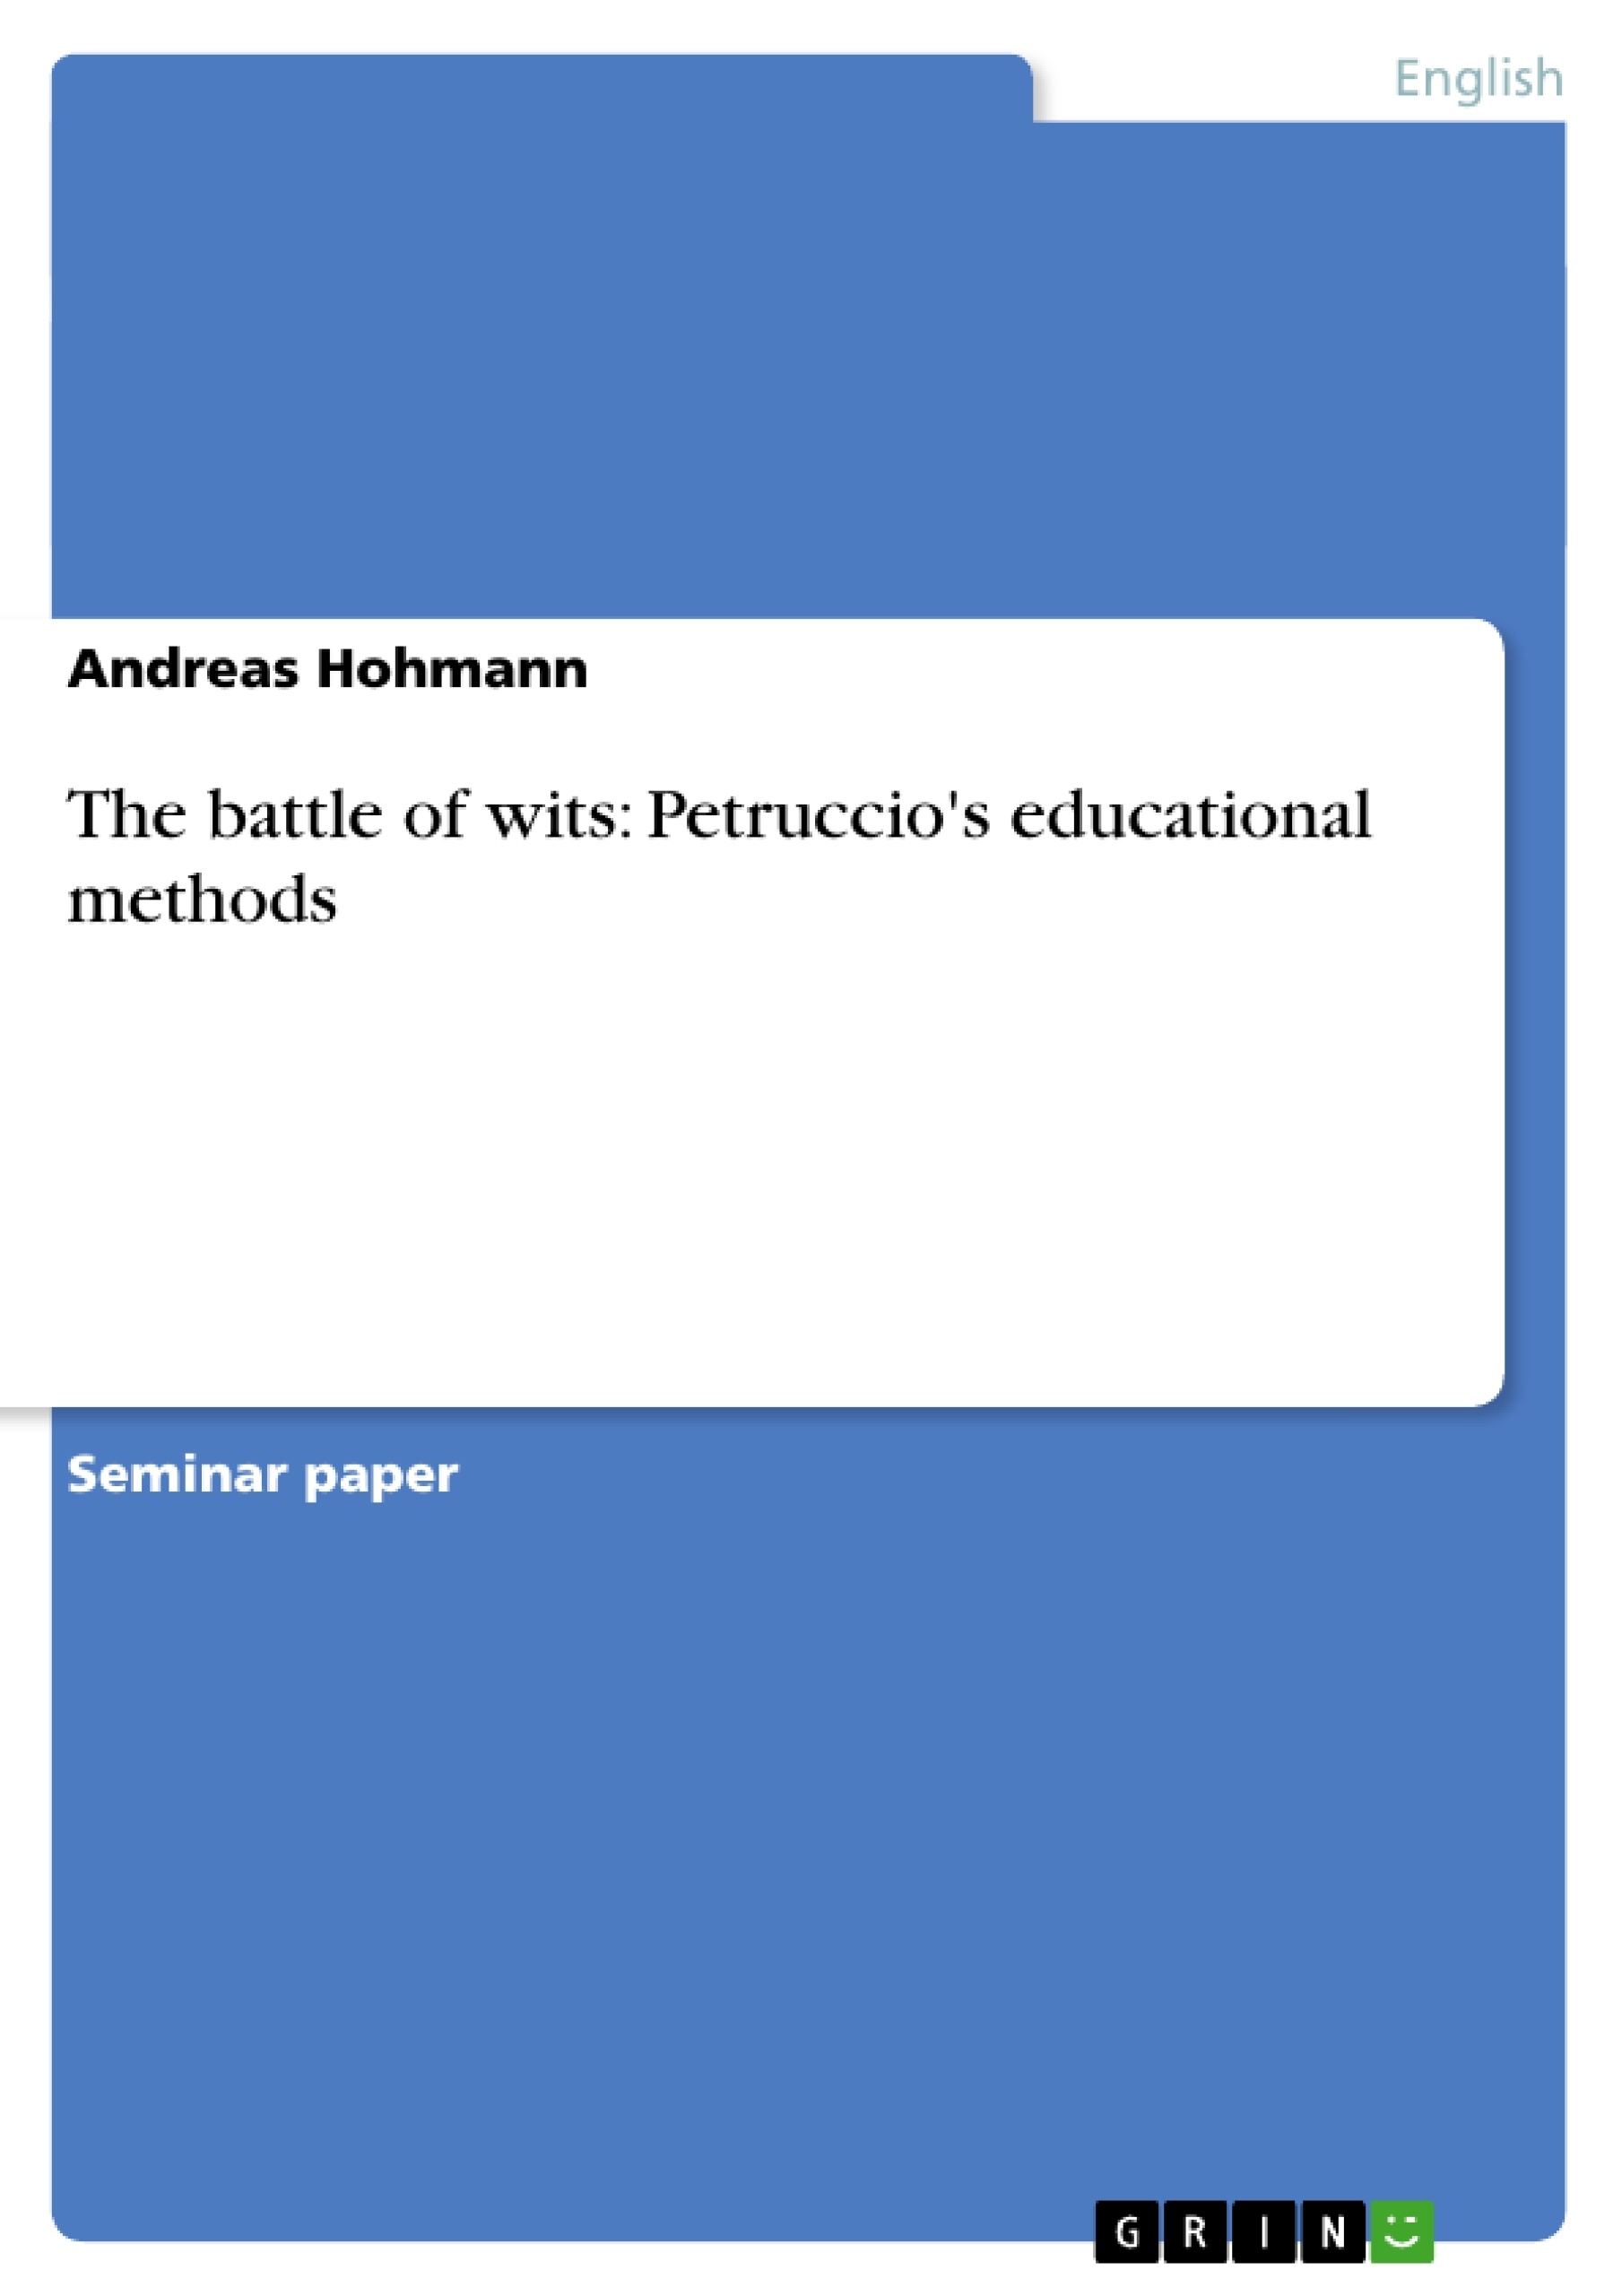 Título: The battle of wits: Petruccio's educational methods